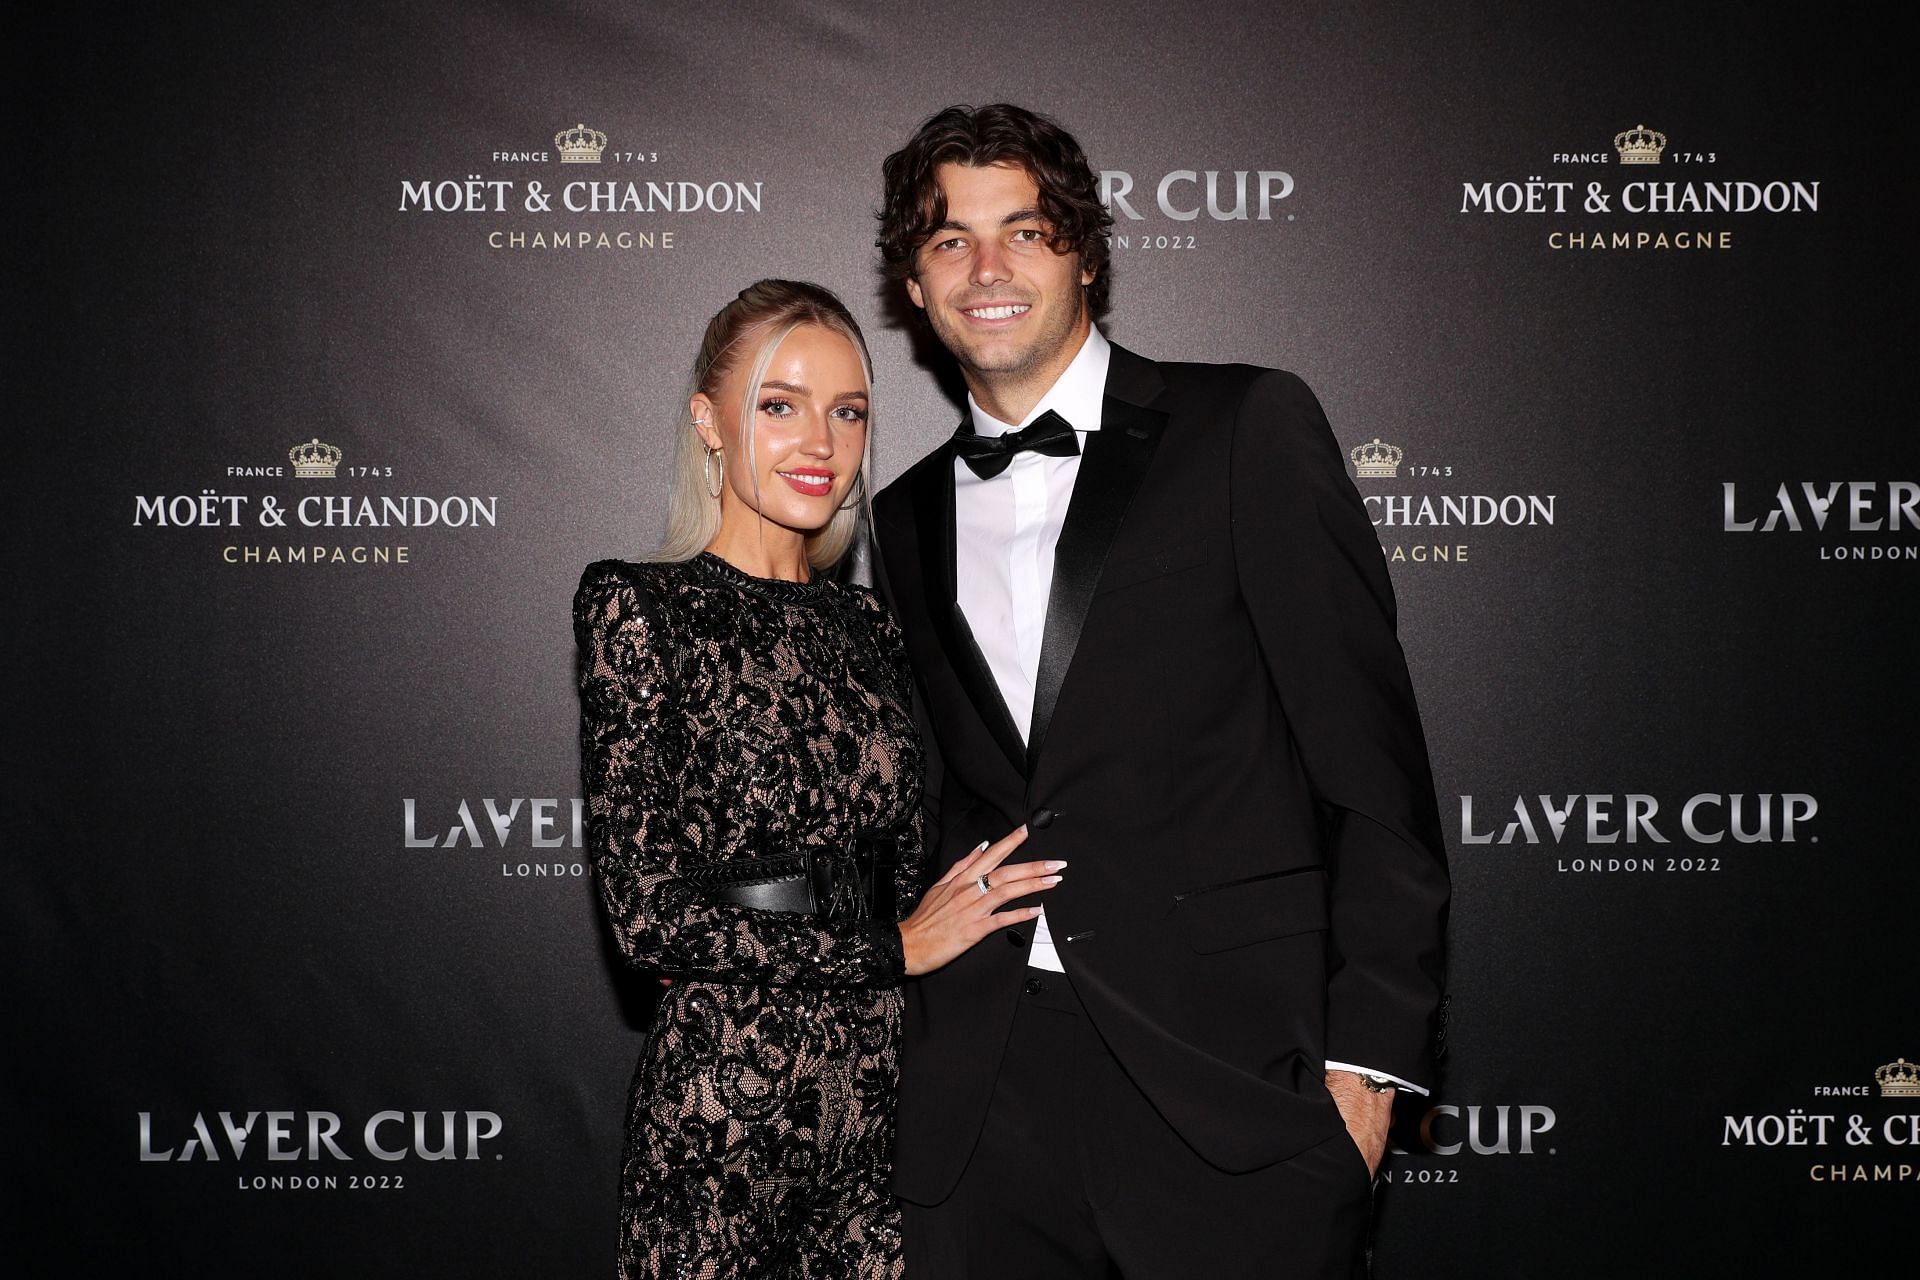 Fritz and his girlfriend Riddle at the 2022 Laver Cup